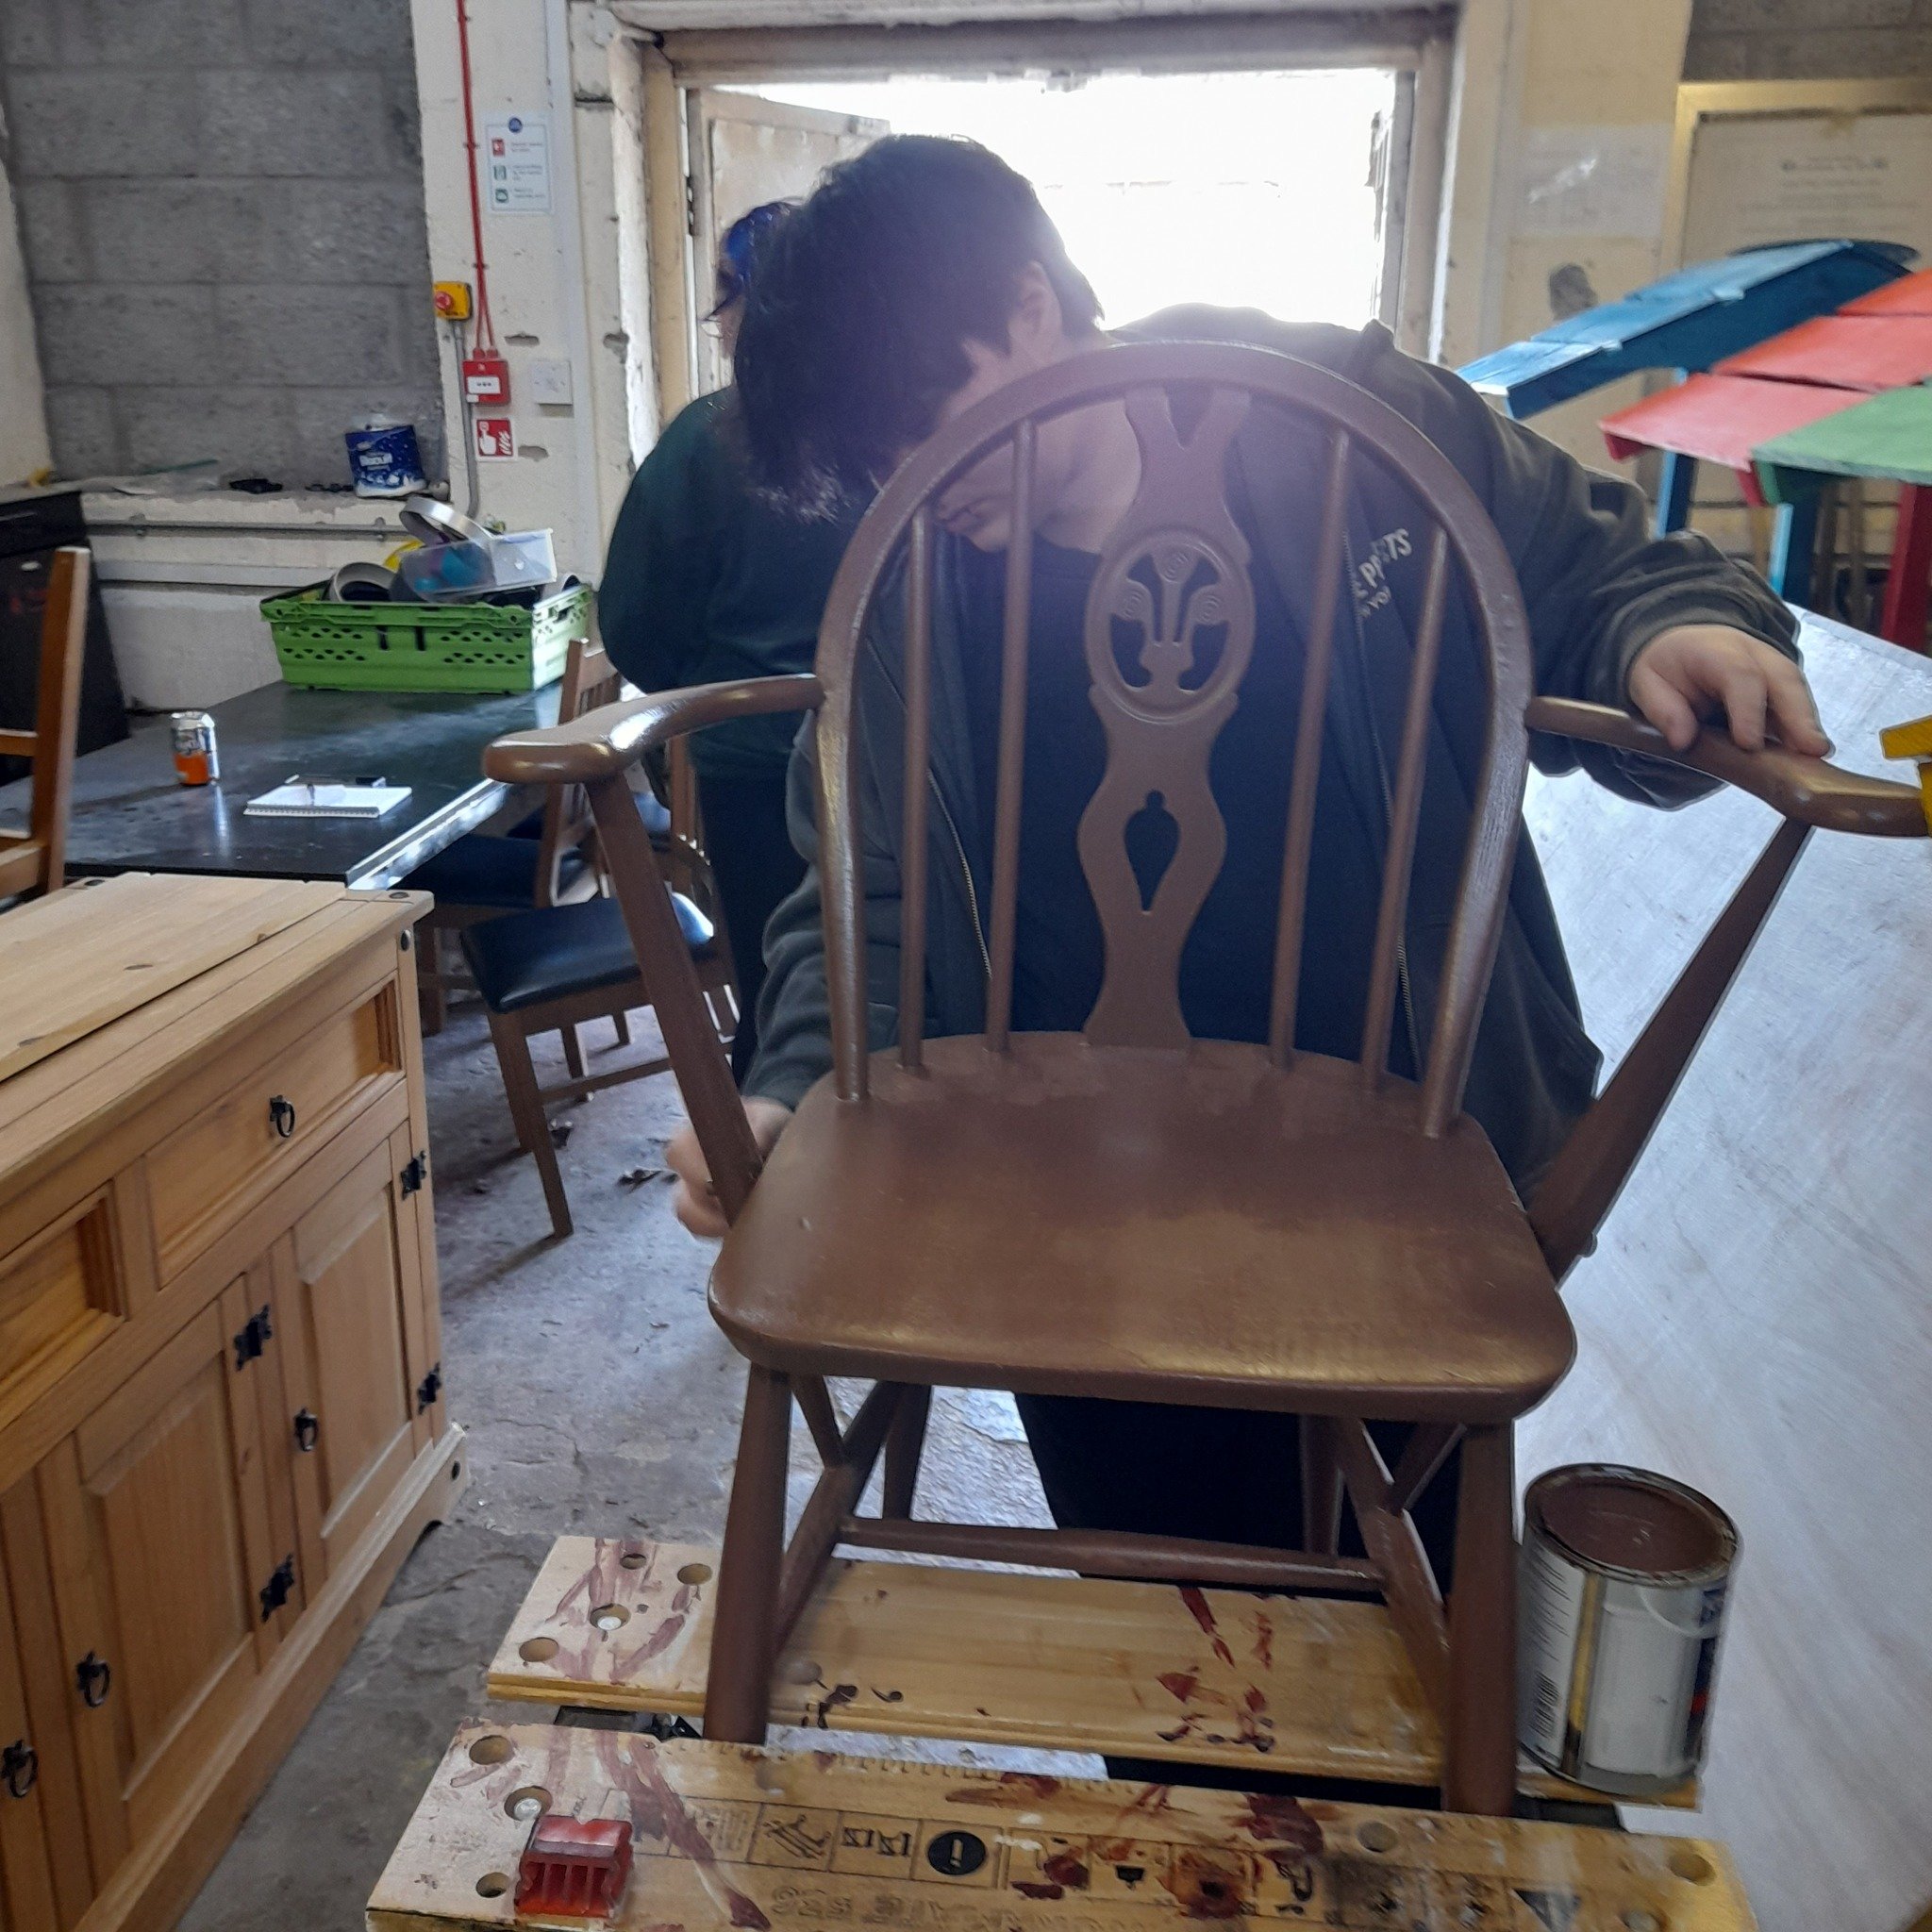 Some lovely work going on in Furniture Fix this week. Cheryl, Youth Development Worker said &quot;the young people are progressing really well with their pieces. Looking forward to seeing how they turn out&quot;.

Are you interested in our Furniture 